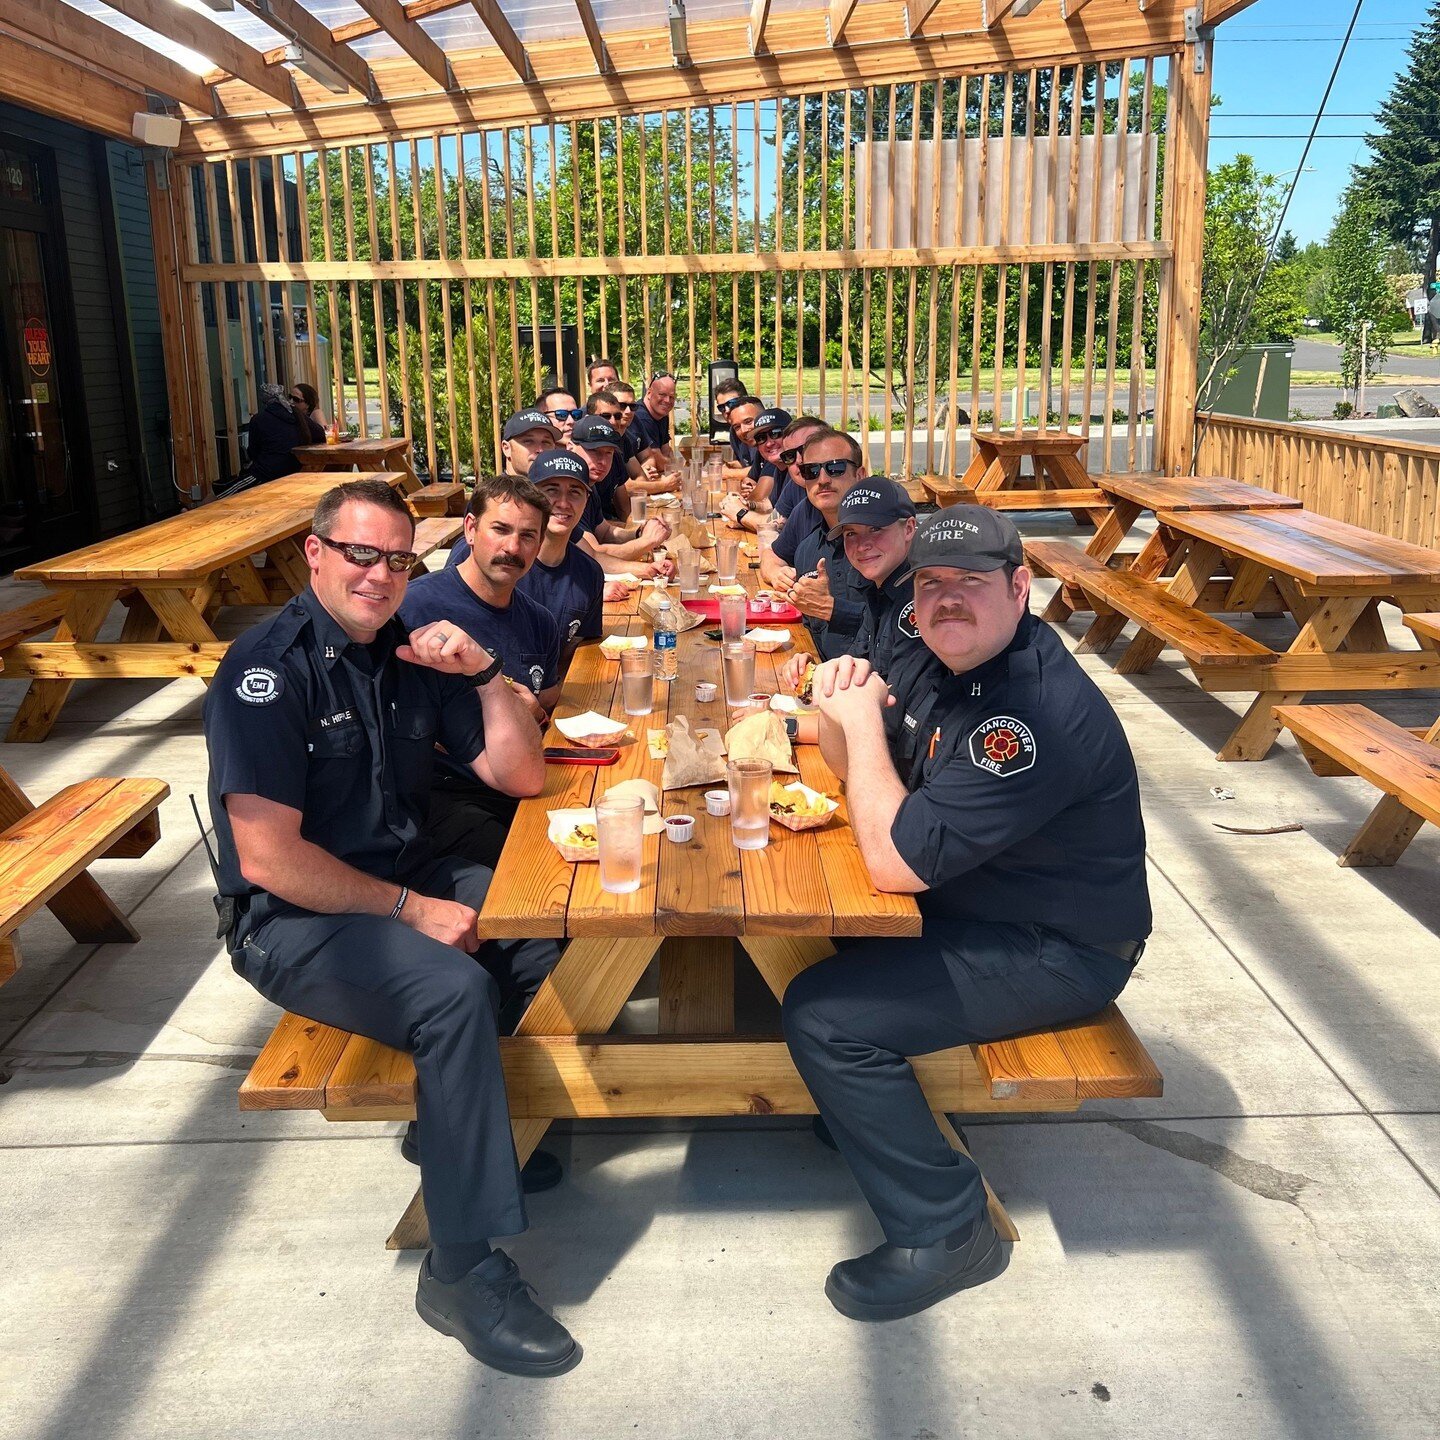 Shouting out our local heroes with the Vancouver FD! Thanks for stopping by for burgers, we appreciate you! 🚒🍔🍟